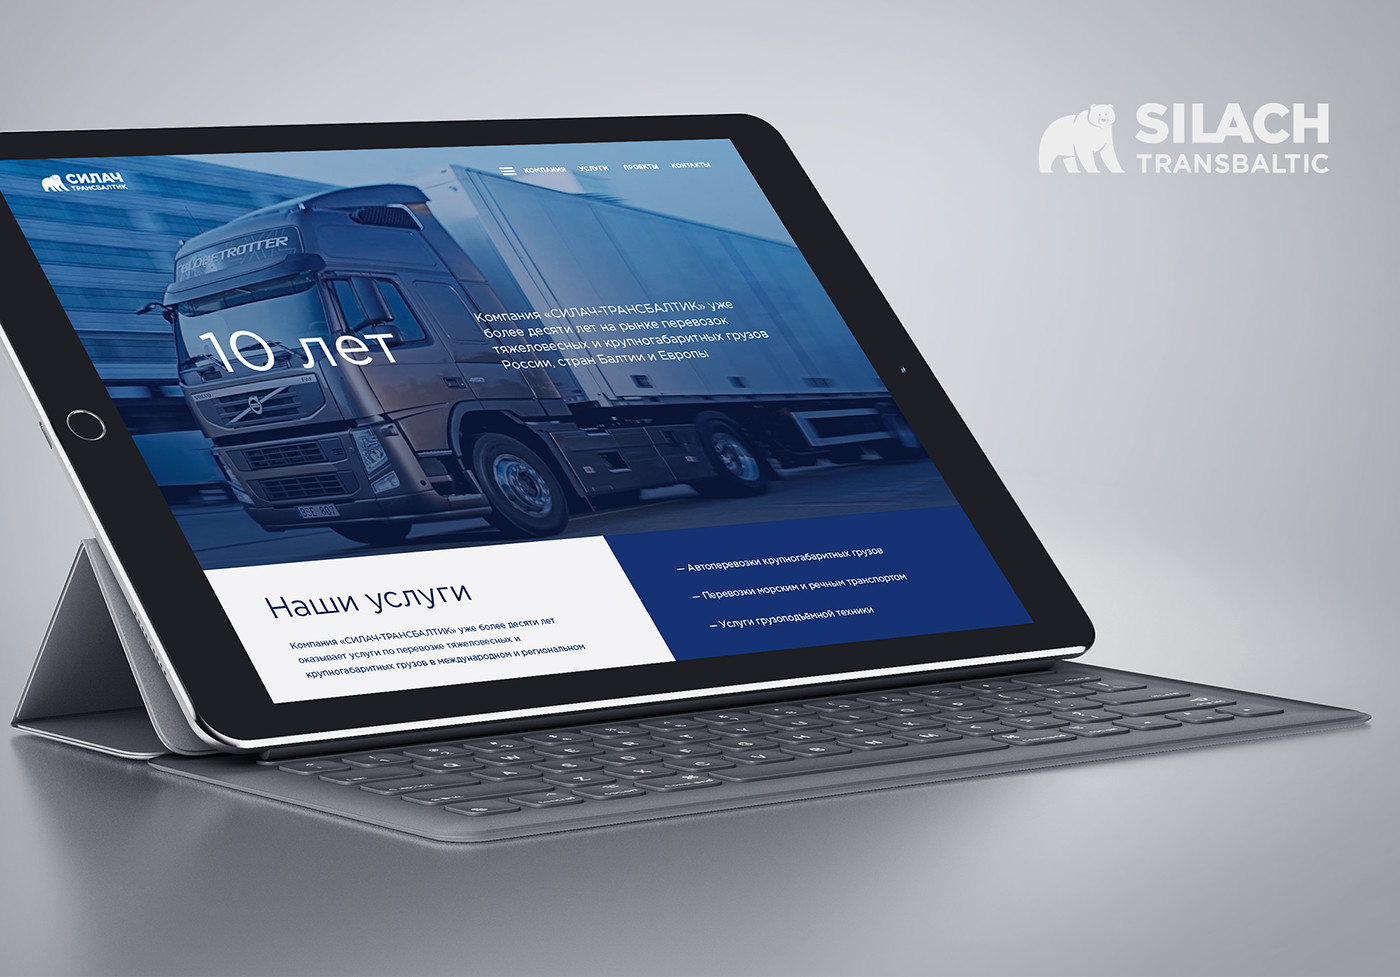 Web site silach bear icons Cargo Baltic freight strong Logistics Transport